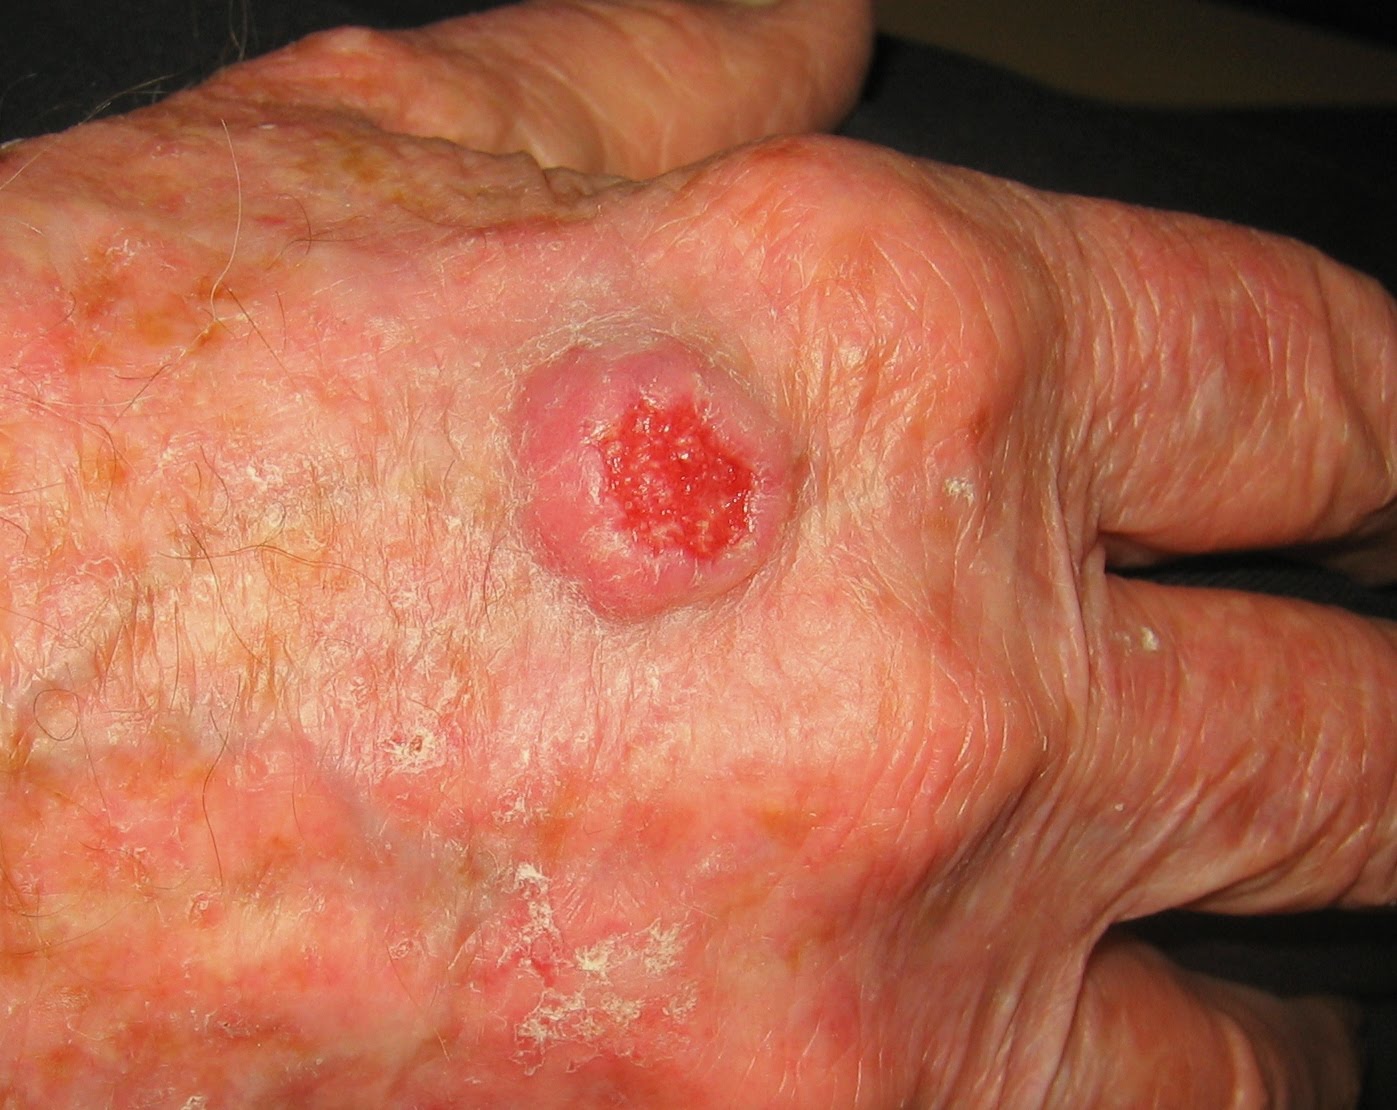 Pictures of Skin Cancers - Squamous Cell Carcinoma